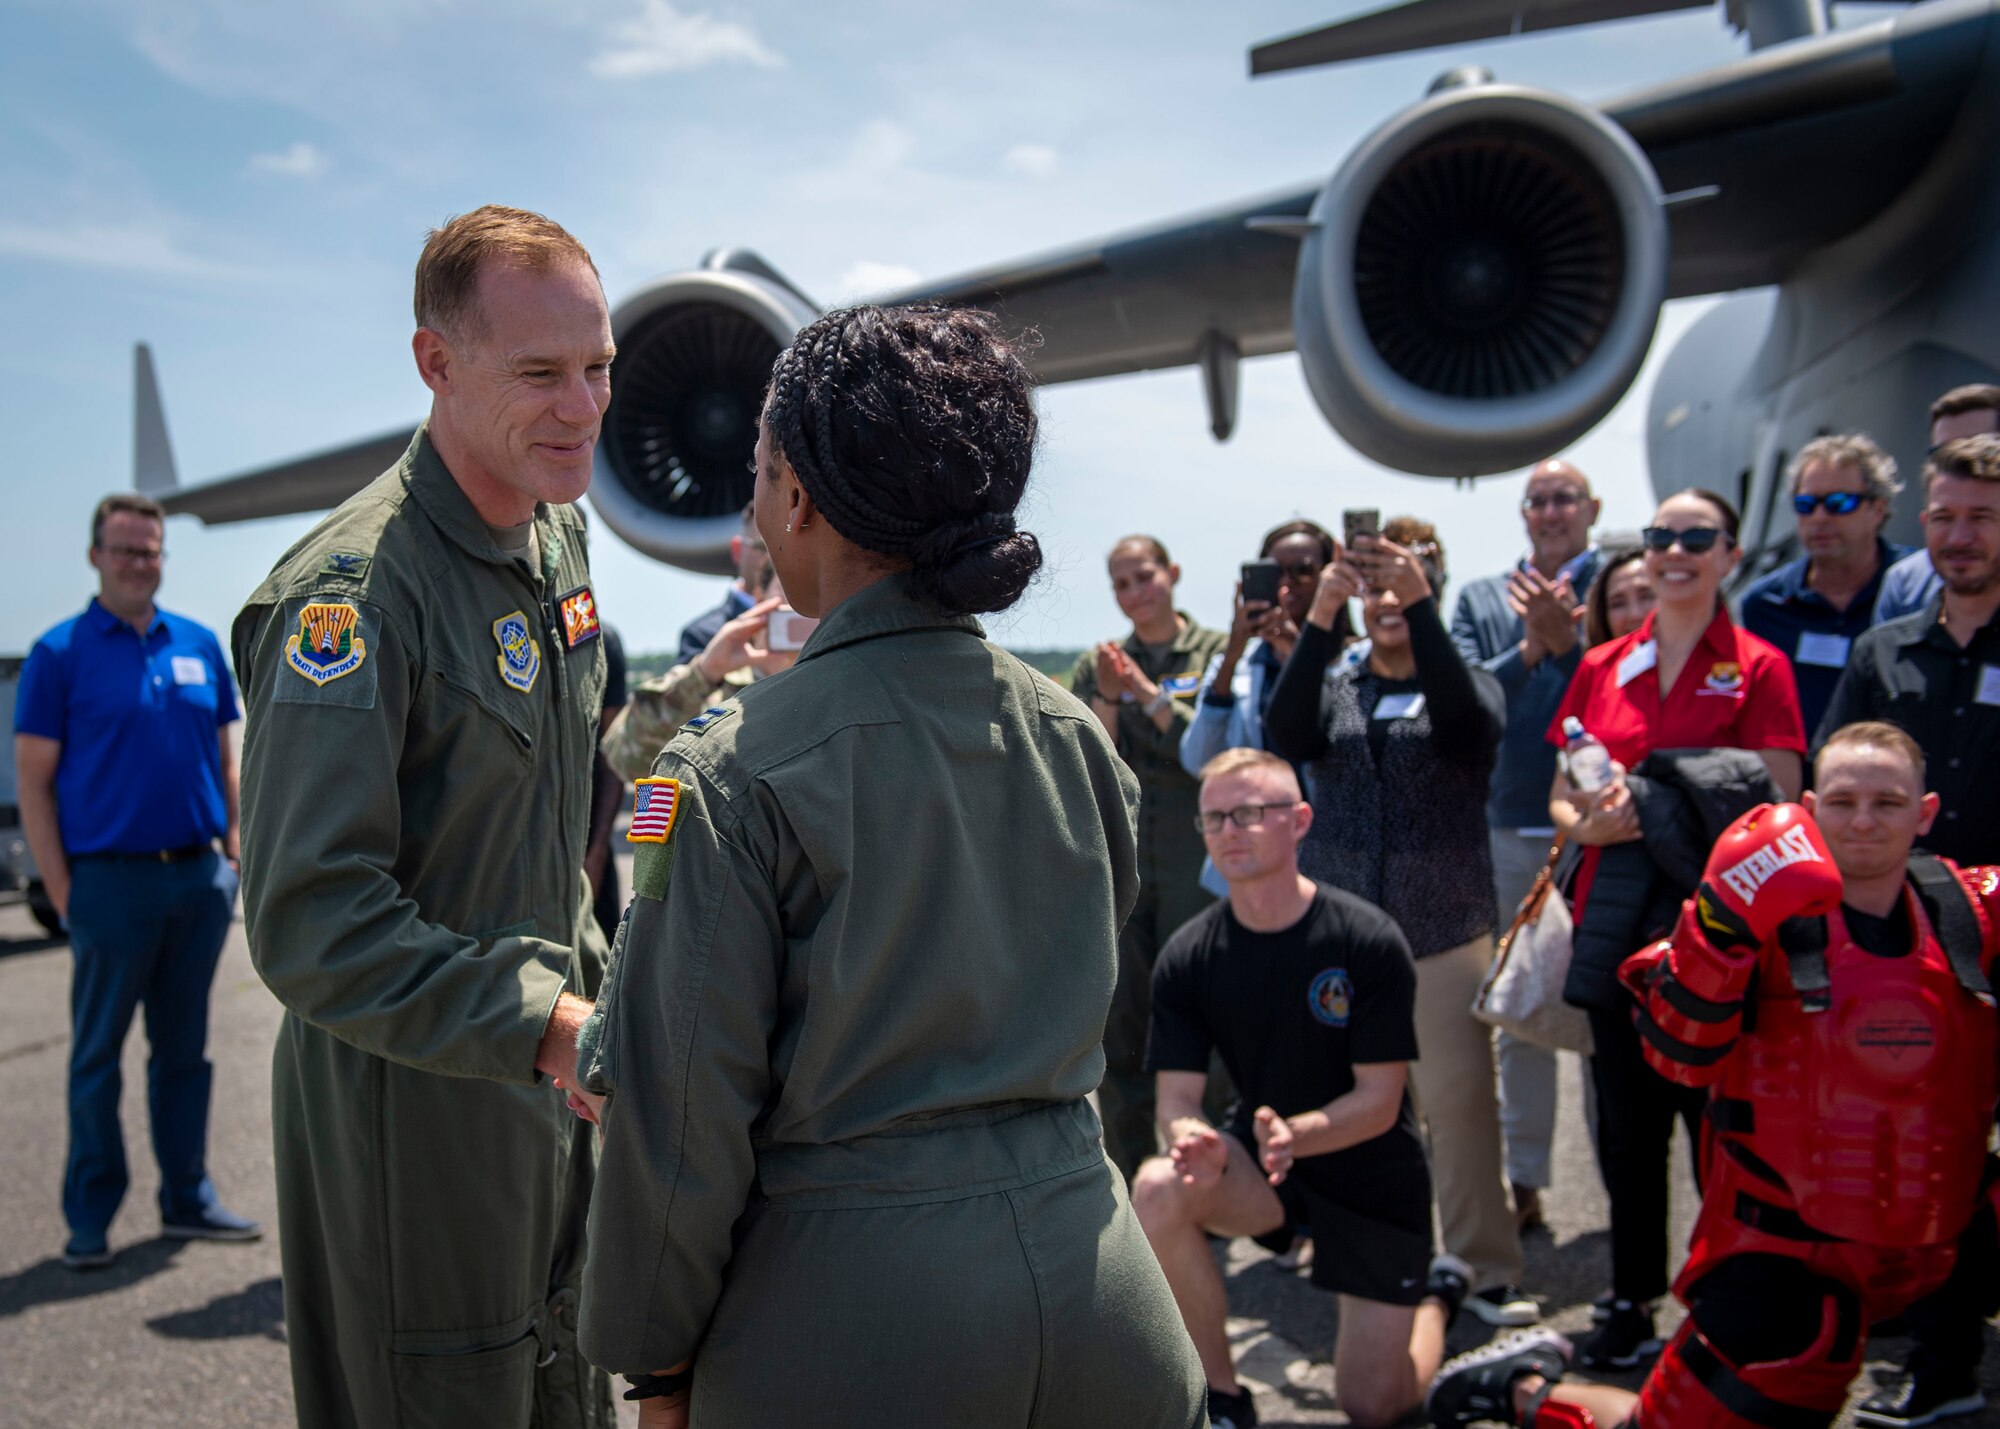 U.S. Air Force Col. Ben Jonsson, 6th Air Refueling Wing commander, recognizes Maj. Rhea McFarland, a pilot assigned to the 14th Airlift Squadron, for her involvement in planning a “flightline rodeo” for civic leaders from the Tampa Bay area at Joint Base Charleston, South Carolina, April 21, 2022. The civic leader group toured the Charleston aircraft, met with Phoenix Ravens and aeromedical evacuation specialists during multi-base field trip to strengthen relations and bolster community support. (U.S. Air Force photo by Airman 1st Class Lauren Cobin)